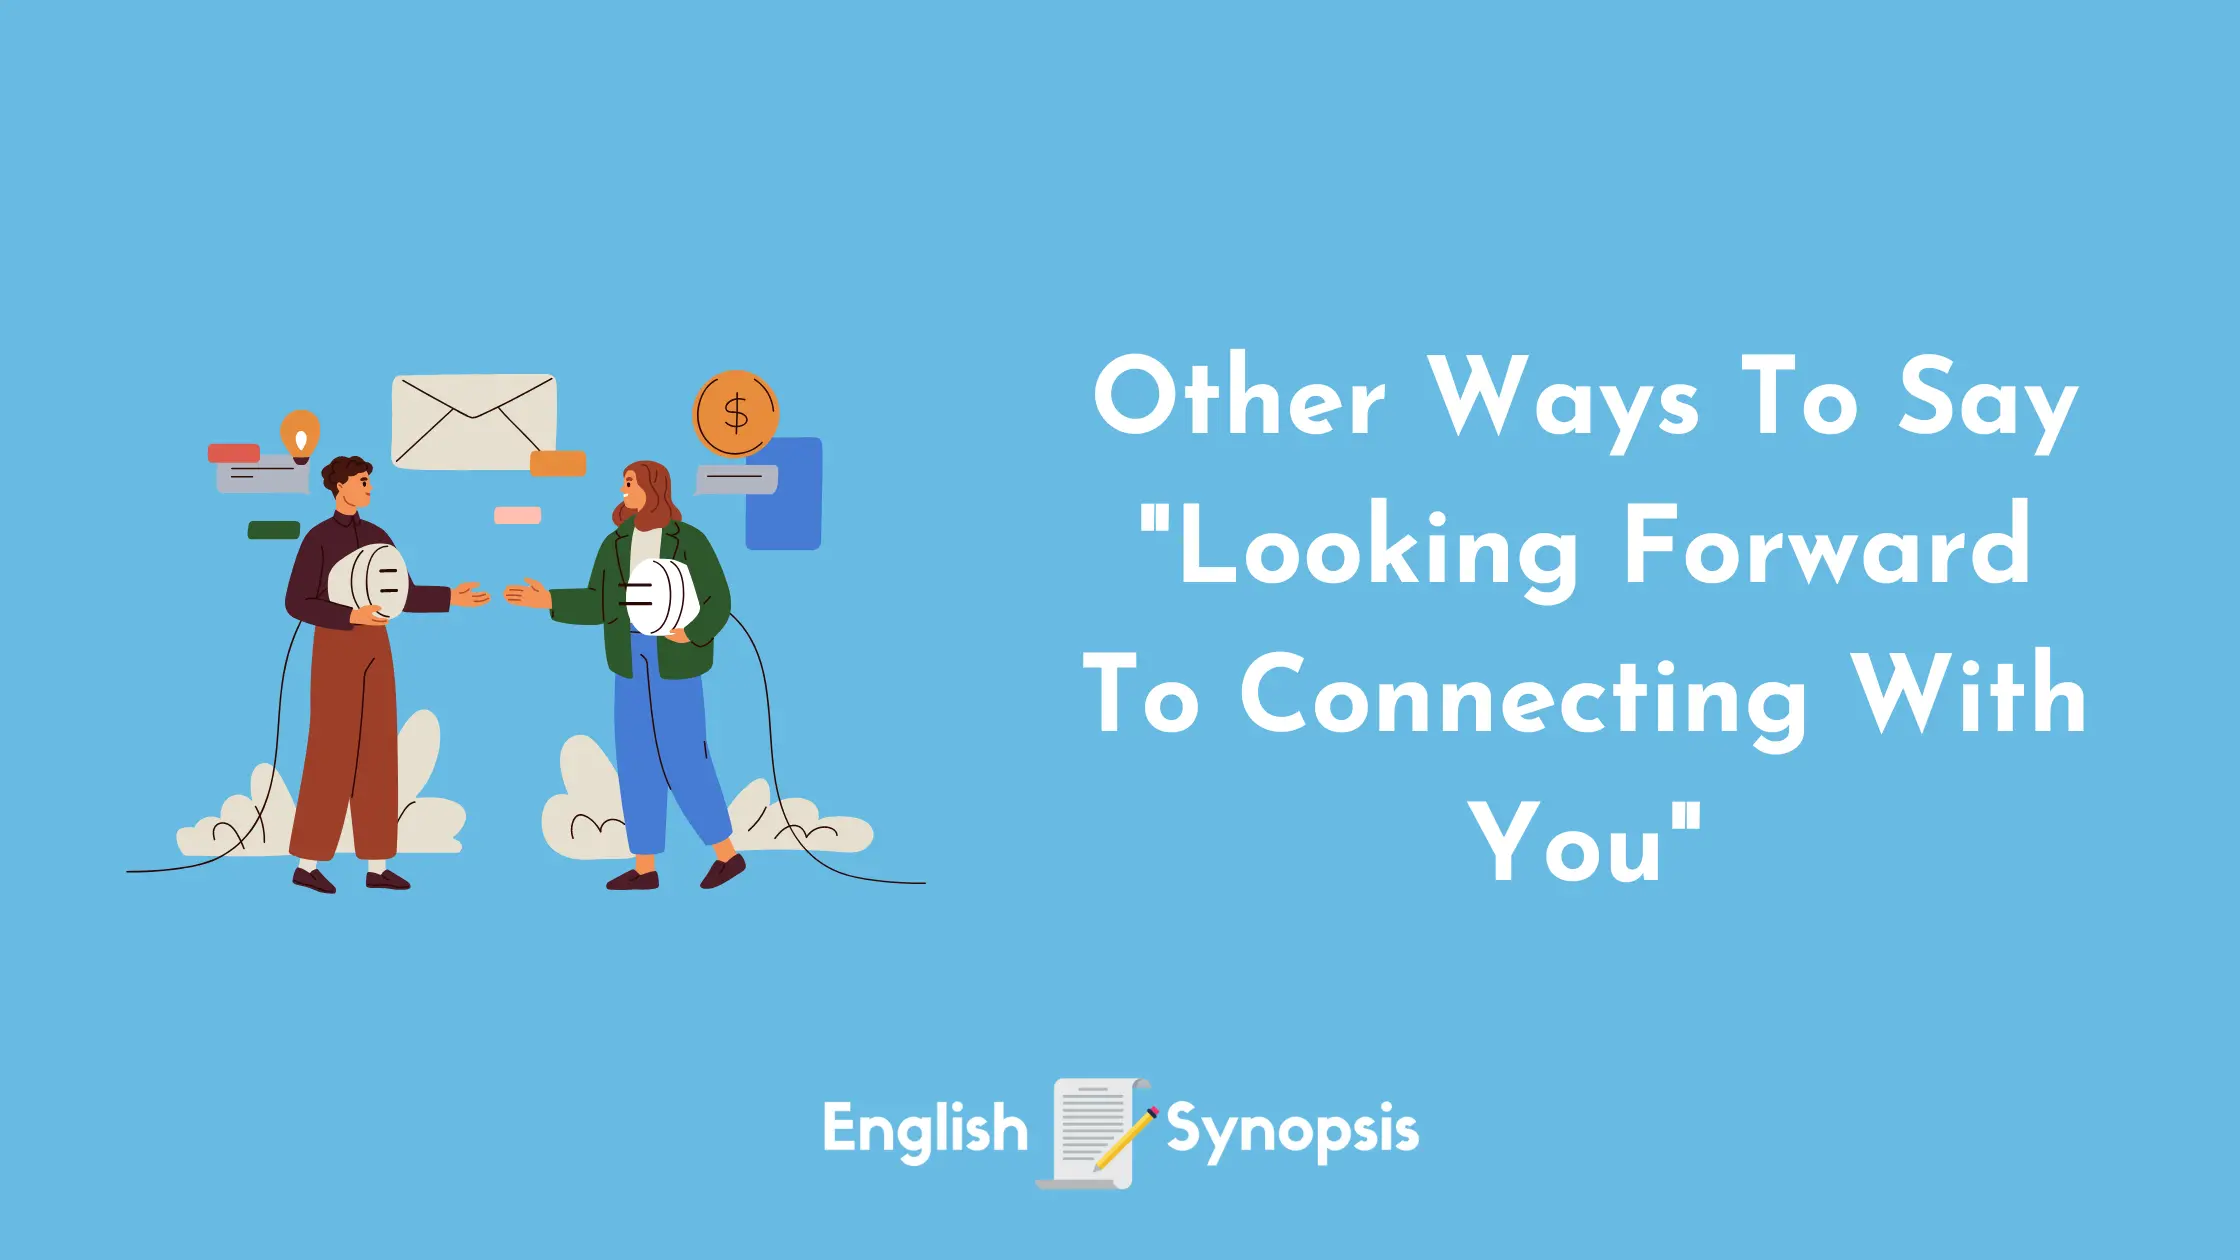 Other Ways To Say "Looking Forward To Connecting With You"